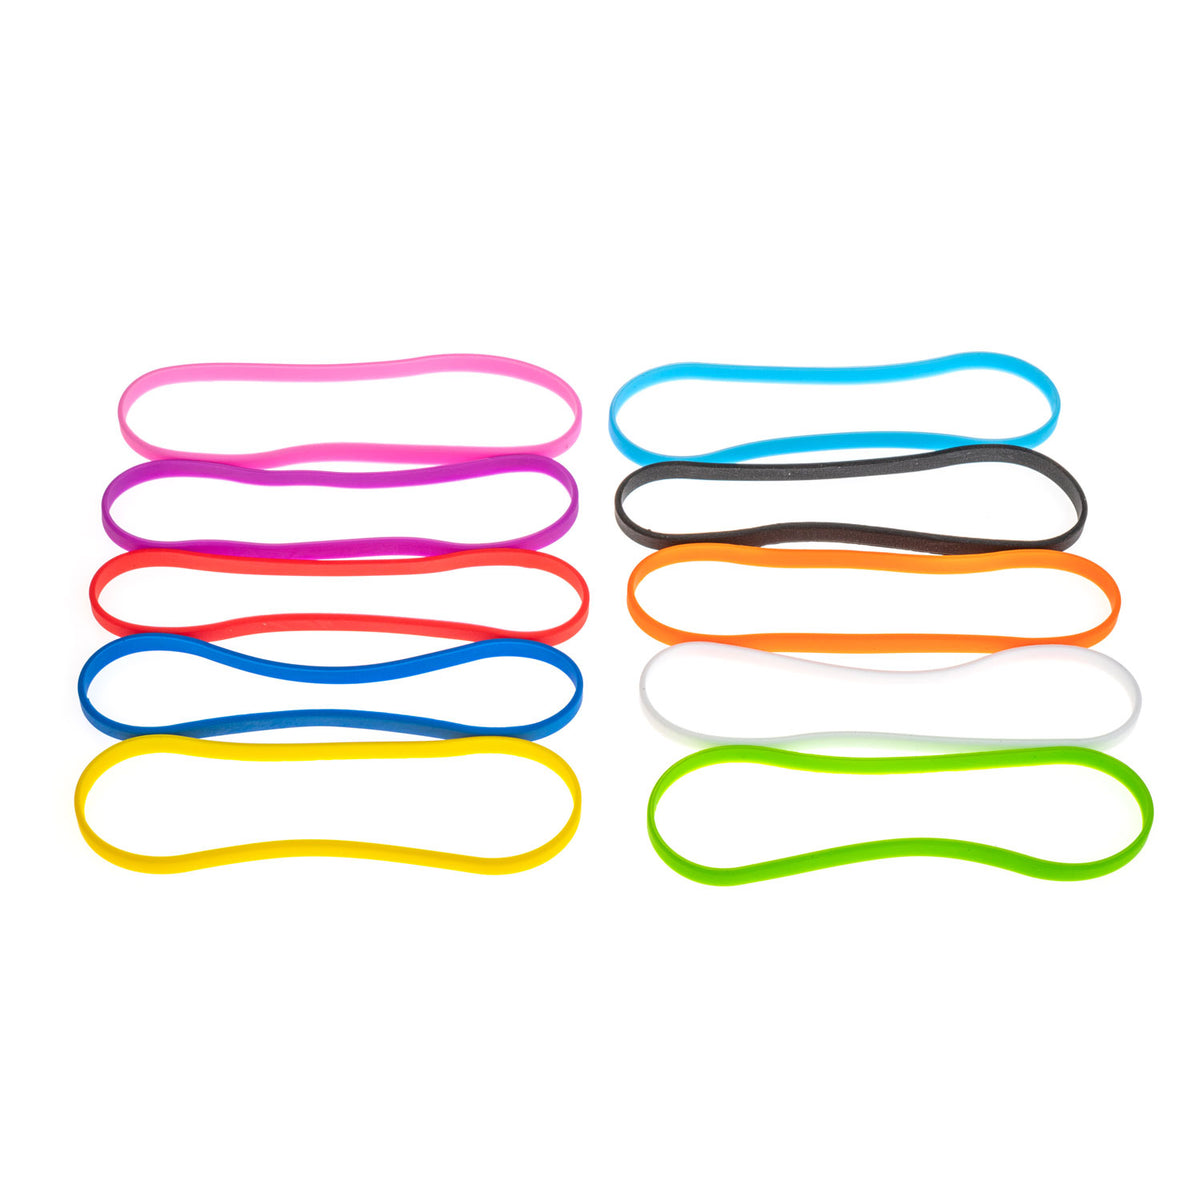 Grifiti Band Joes 12 x 0.25 2.54 inch Diameter 10 Pack Assorted Colorful Small Silicone Little Colored Rubber Bands Wrist Cooking Office Boxes